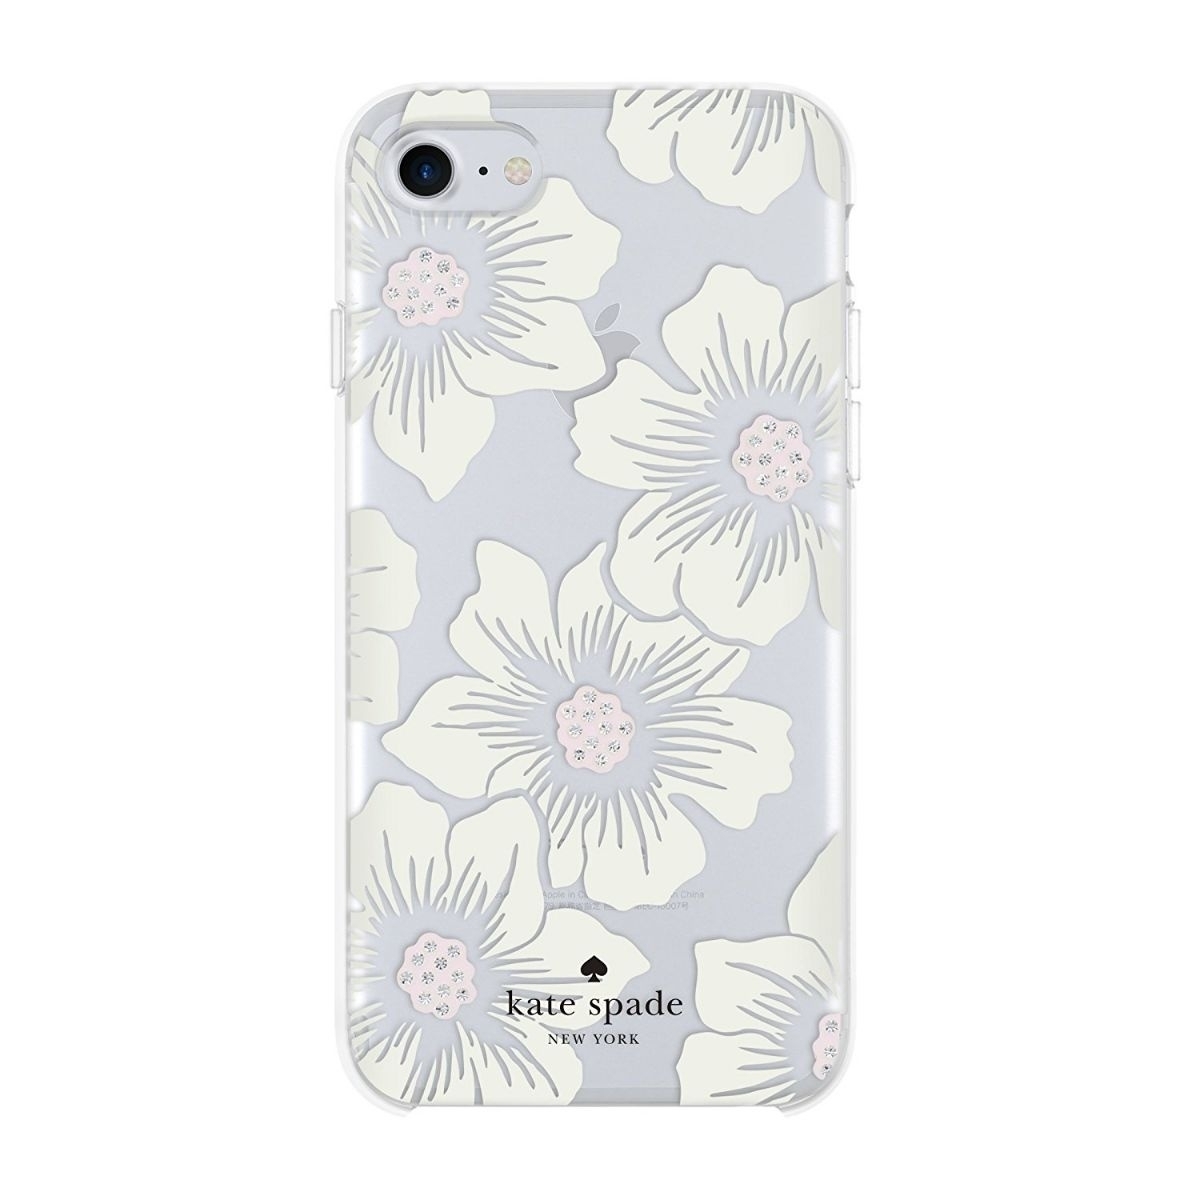 Kate Spade Open Bottom Case For IPhone 8/7 - Hollyhock White Flowers/Clear (Refurbished)